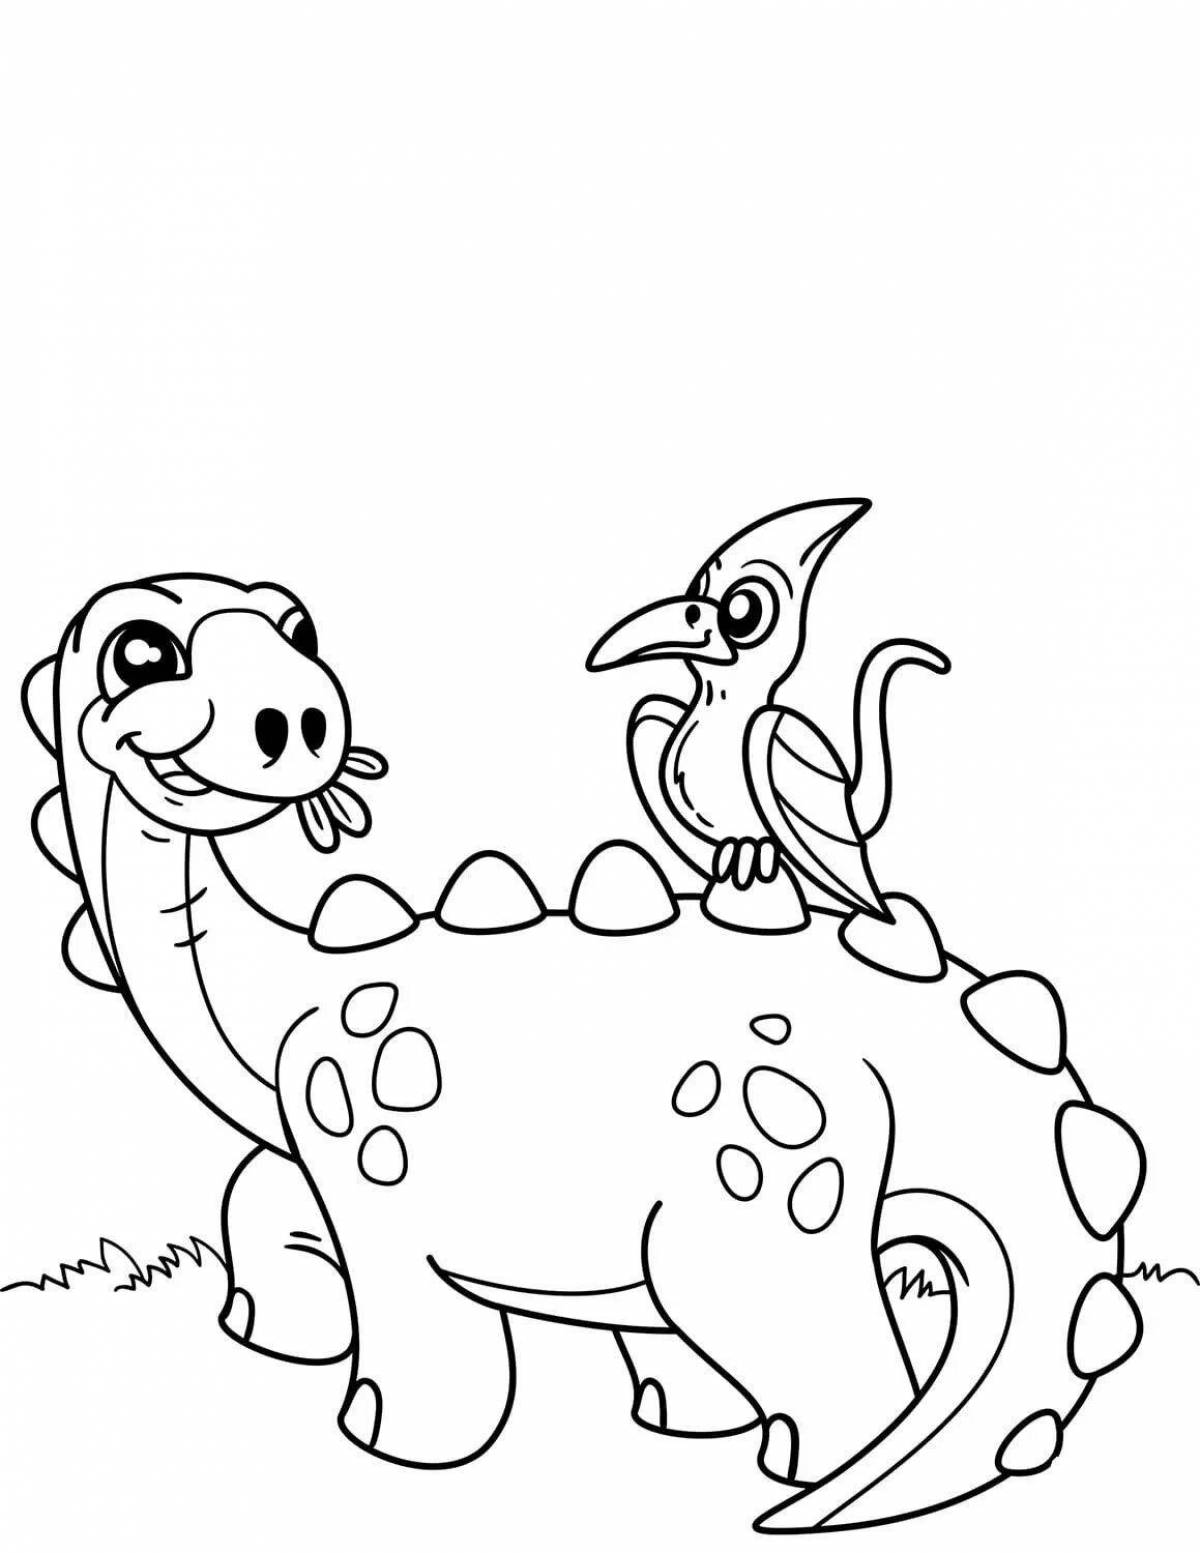 Awesome Zavriki coloring pages